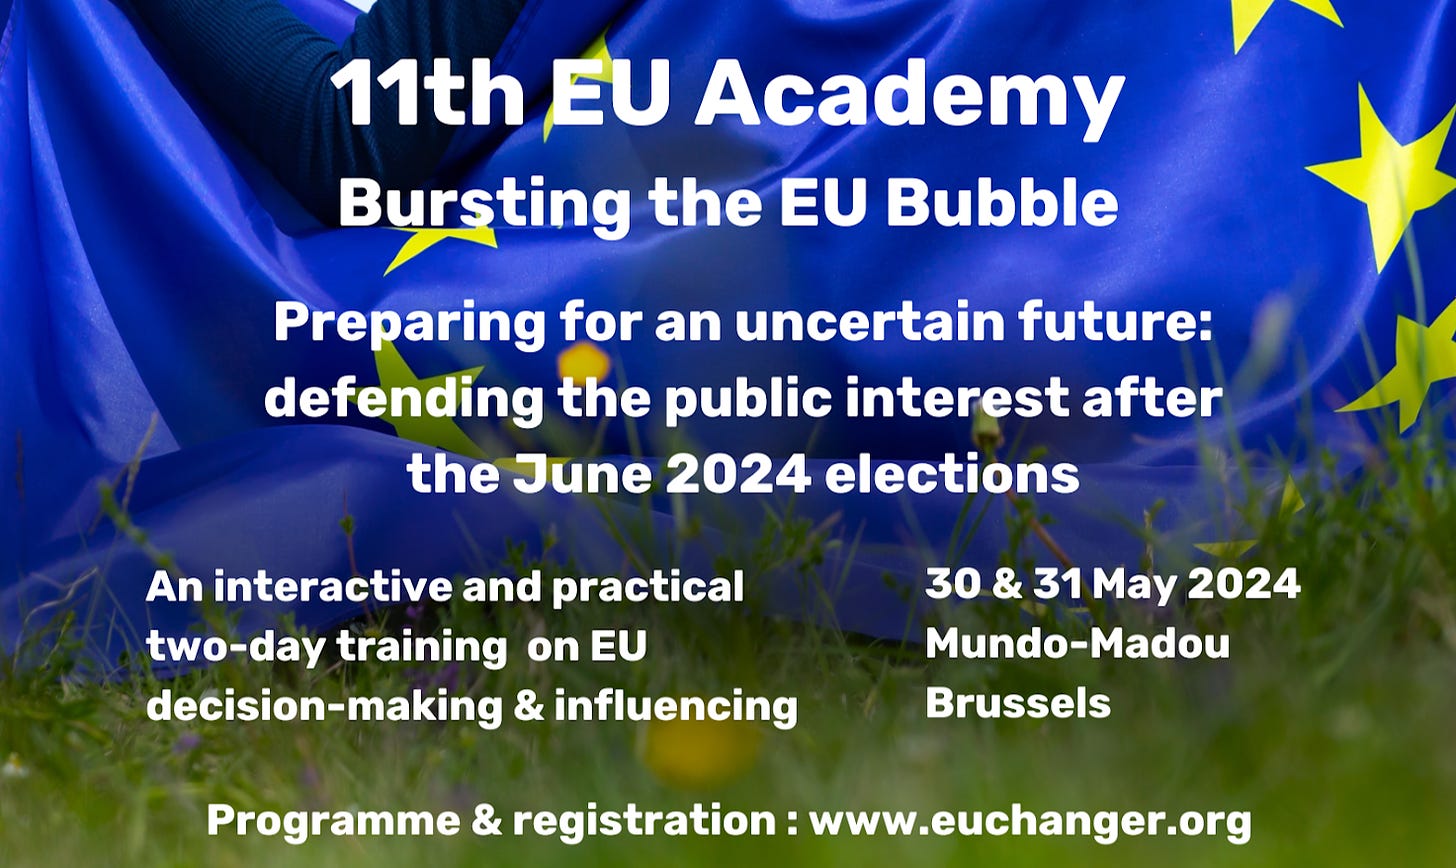 11th EU Academy: Bursting the Eu bubble. Preparing to defend the public good after the June 2024 elections. An interaction and practical two-day training on EU decision-making and influencing. 30 & 31 May 2024, Mundo Madou Brussels.